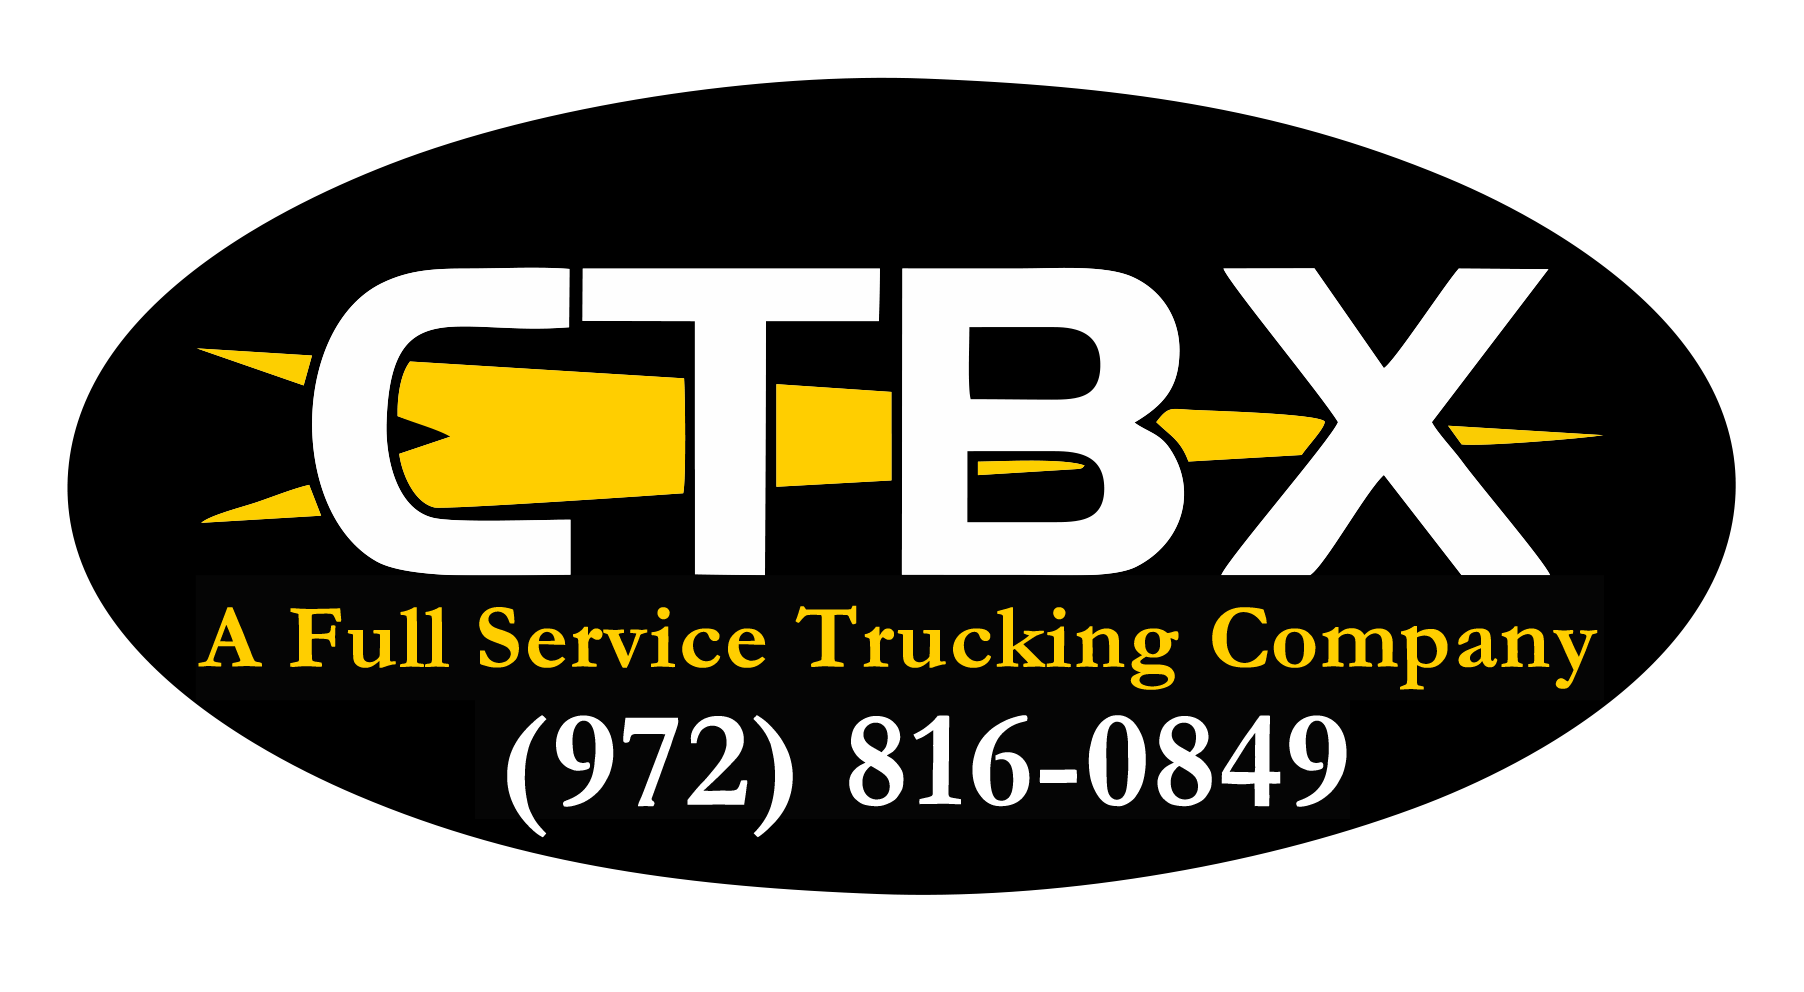 CTBX A Full Service Trucking Company - Texas Heavy Haul & Oversized Transport Services